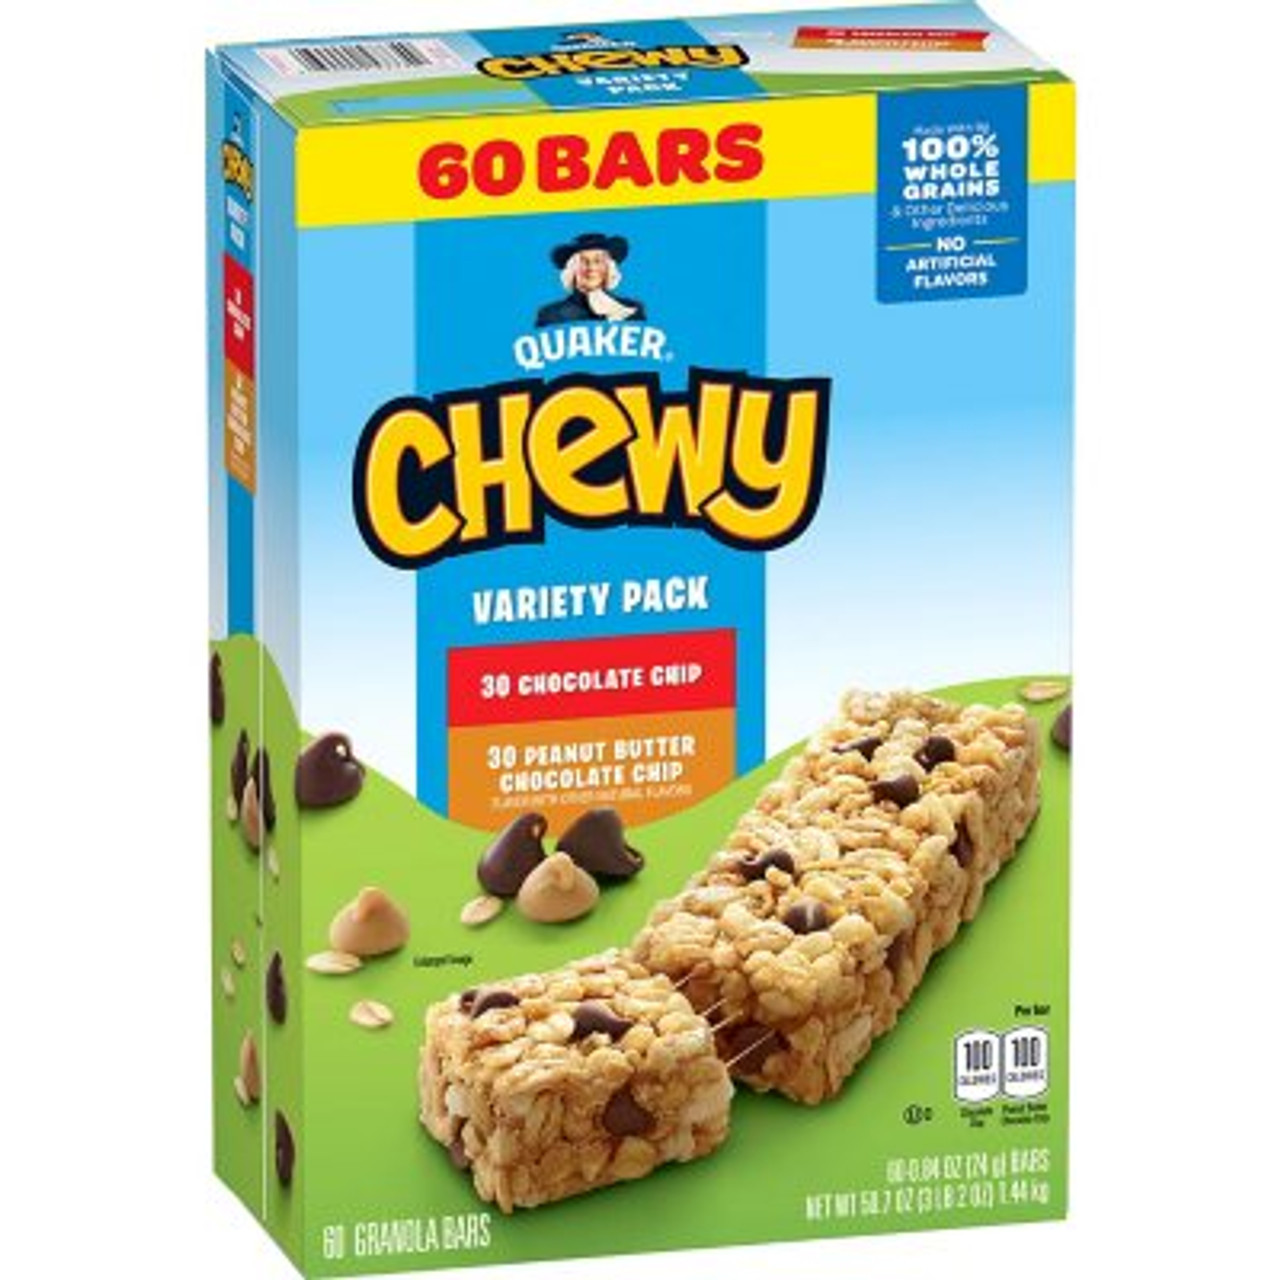 Quaker Chewy Variety Pack, Chocolate Chip and Peanut Butter Chocolate Chip (60 ct.) - *Pre-Order